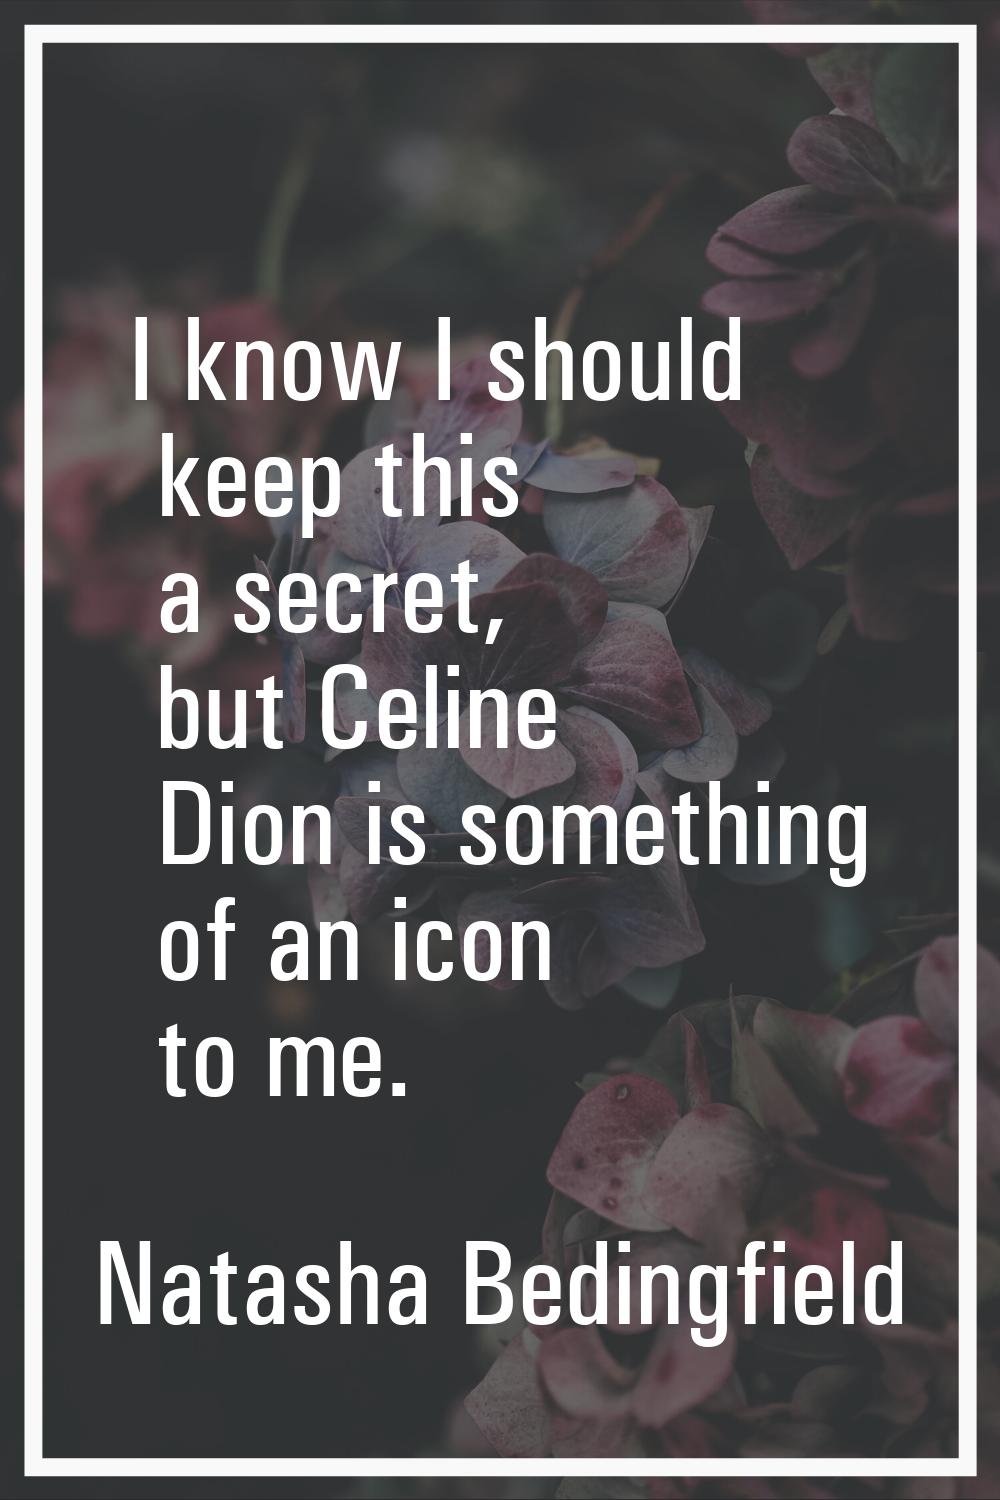 I know I should keep this a secret, but Celine Dion is something of an icon to me.